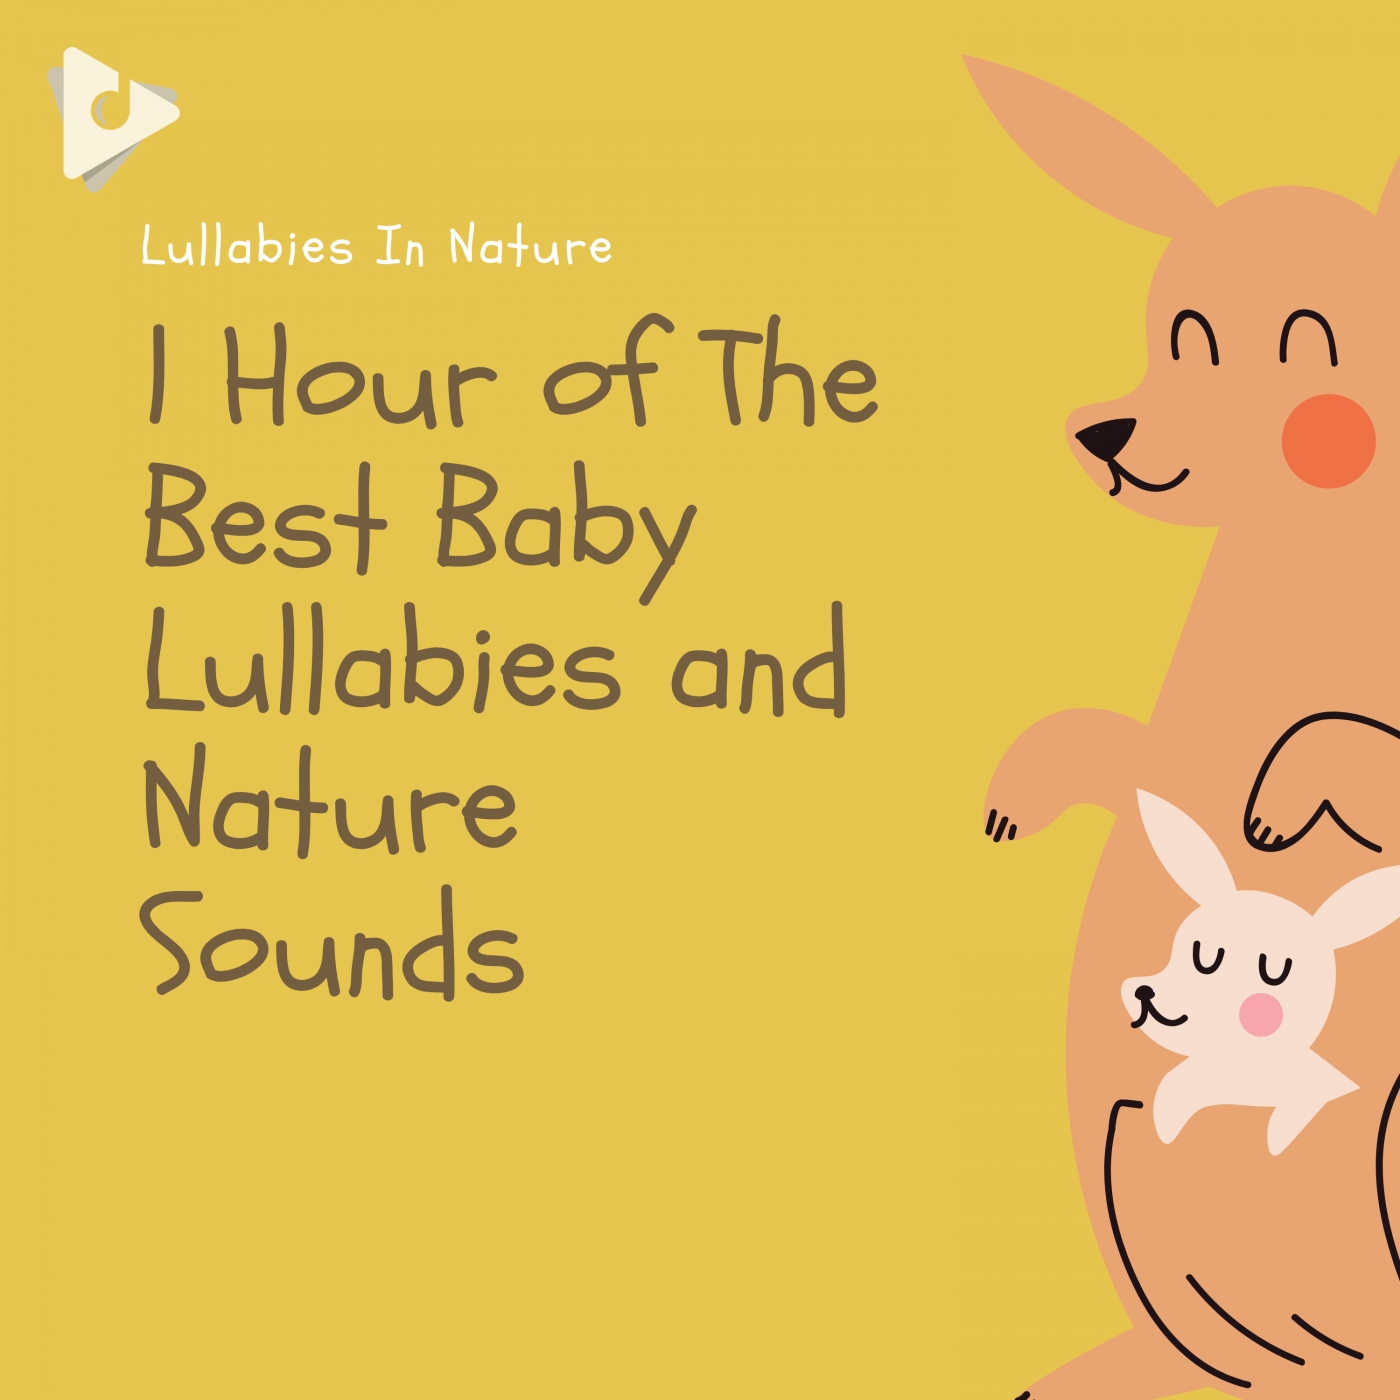 1 Hour of The Best Baby Lullabies and Nature Sounds